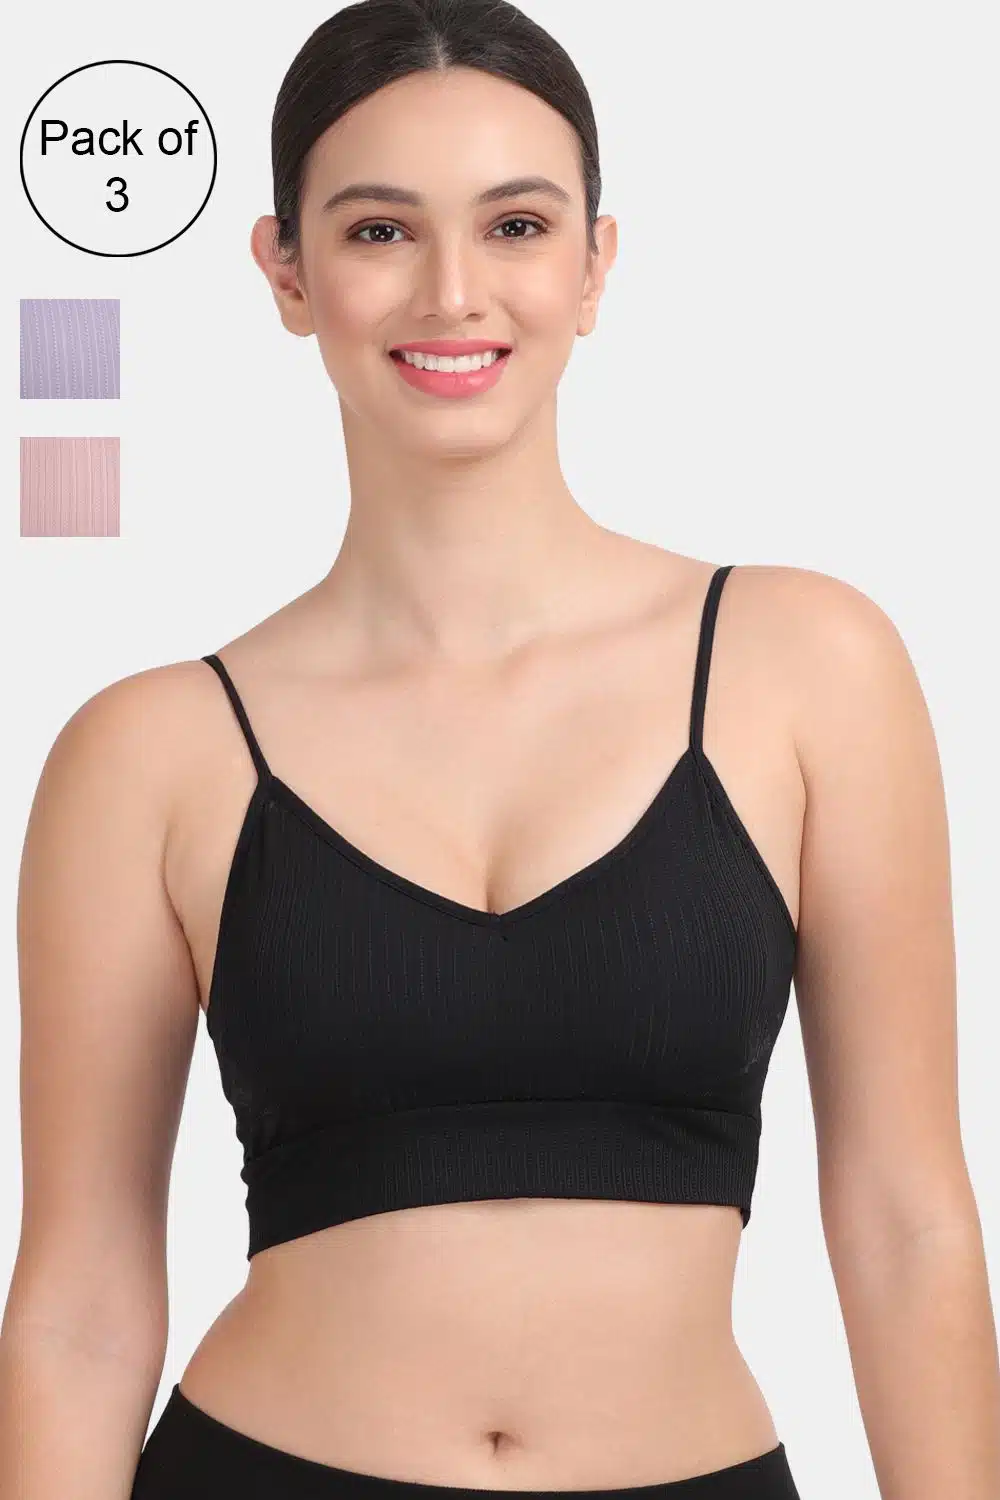 Pack of 2 Combed Cotton Non-Wired Secret Support Bra with Detachable Strap